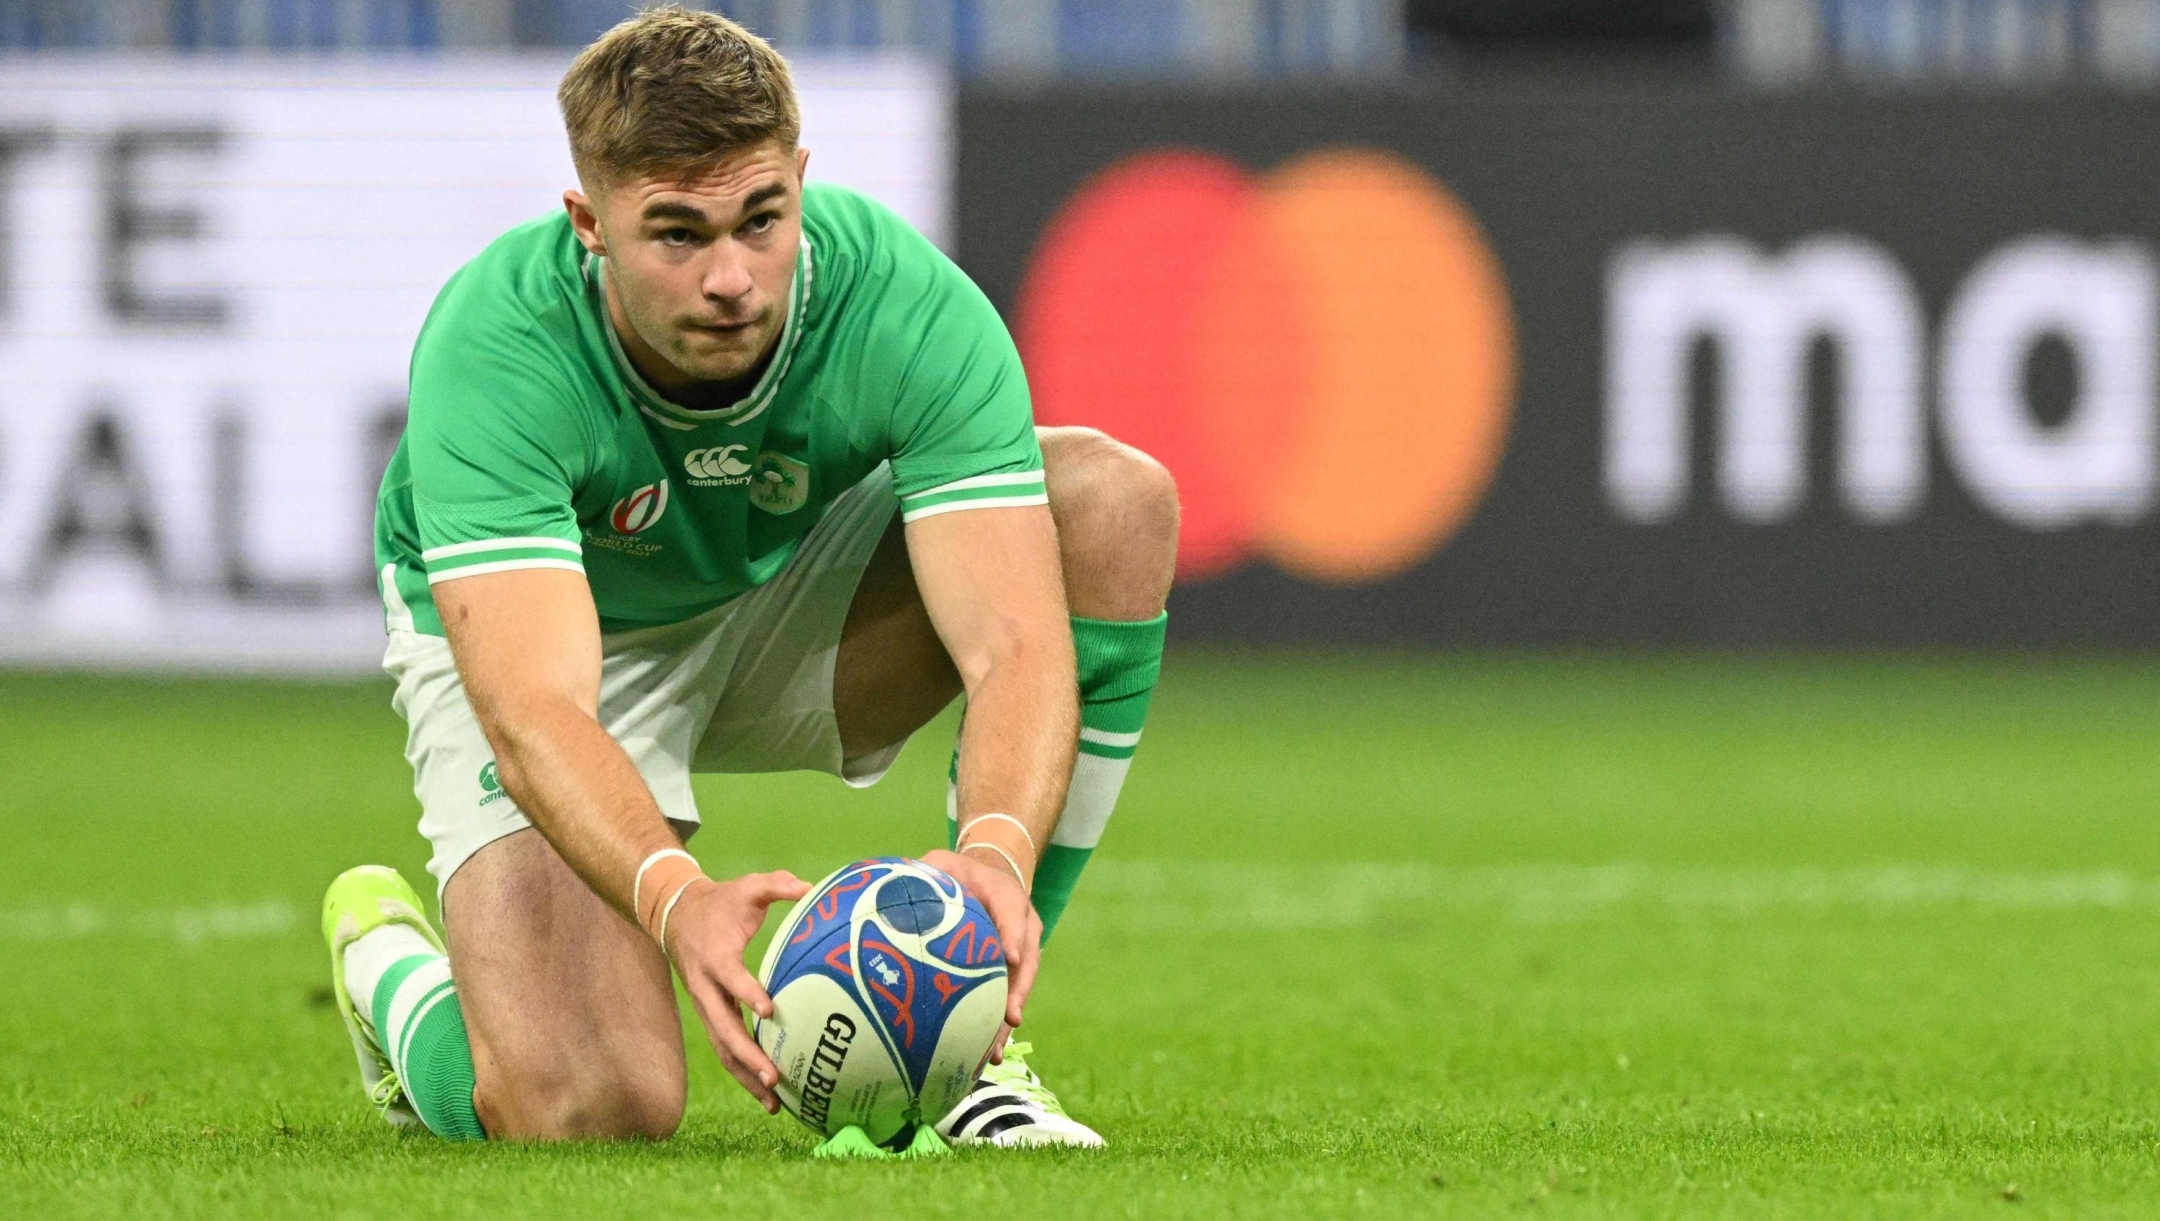 (FILES) Ireland's fly-half Jack Crowley gets ready to kick a penalty during the France 2023 Rugby World Cup Pool B match between South Africa and Ireland at the Stade de France in Saint-Denis, on the outskirts of Paris on September 23, 2023. With Nash, Crowley and MacCarthy, Ireland's team holds a diagonal with not much international experience, before the clash against France on February 2, 2024, in the opening match of the Six Nations tournament. (Photo by MARTIN BUREAU / AFP)